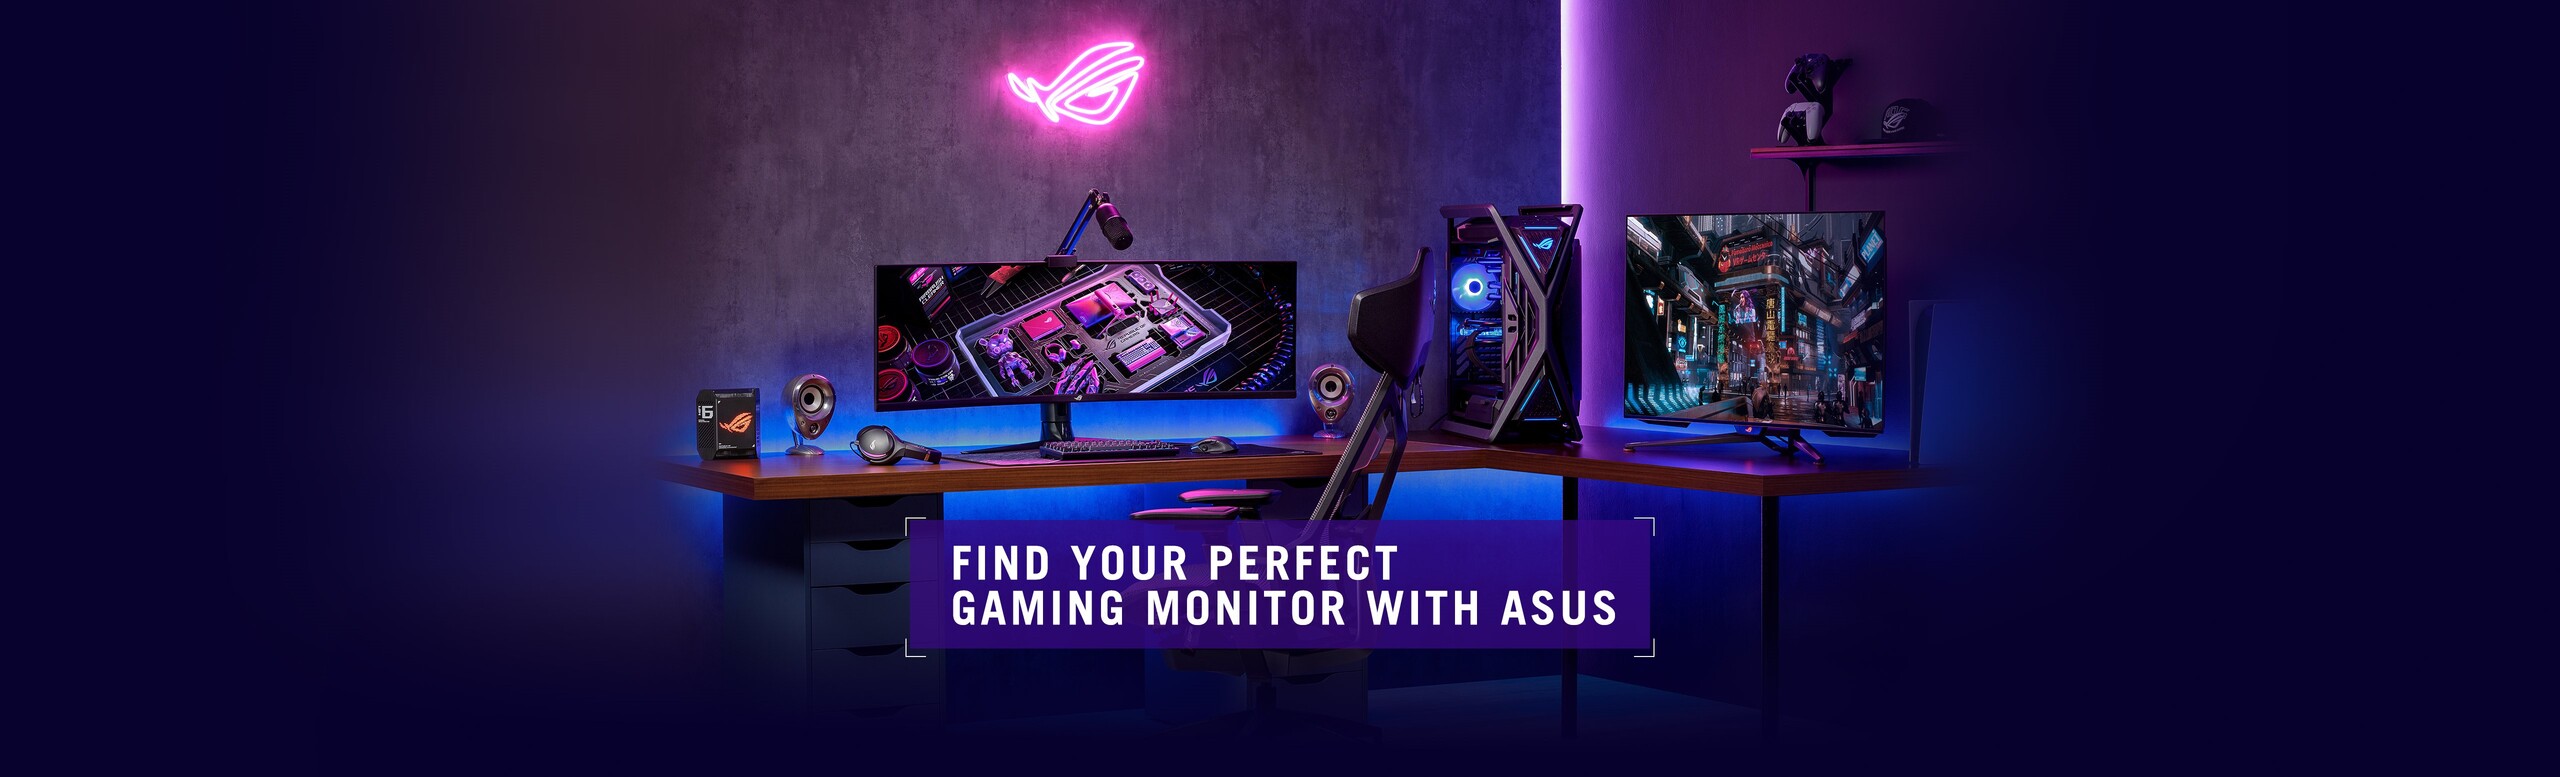 Best Gaming Monitor